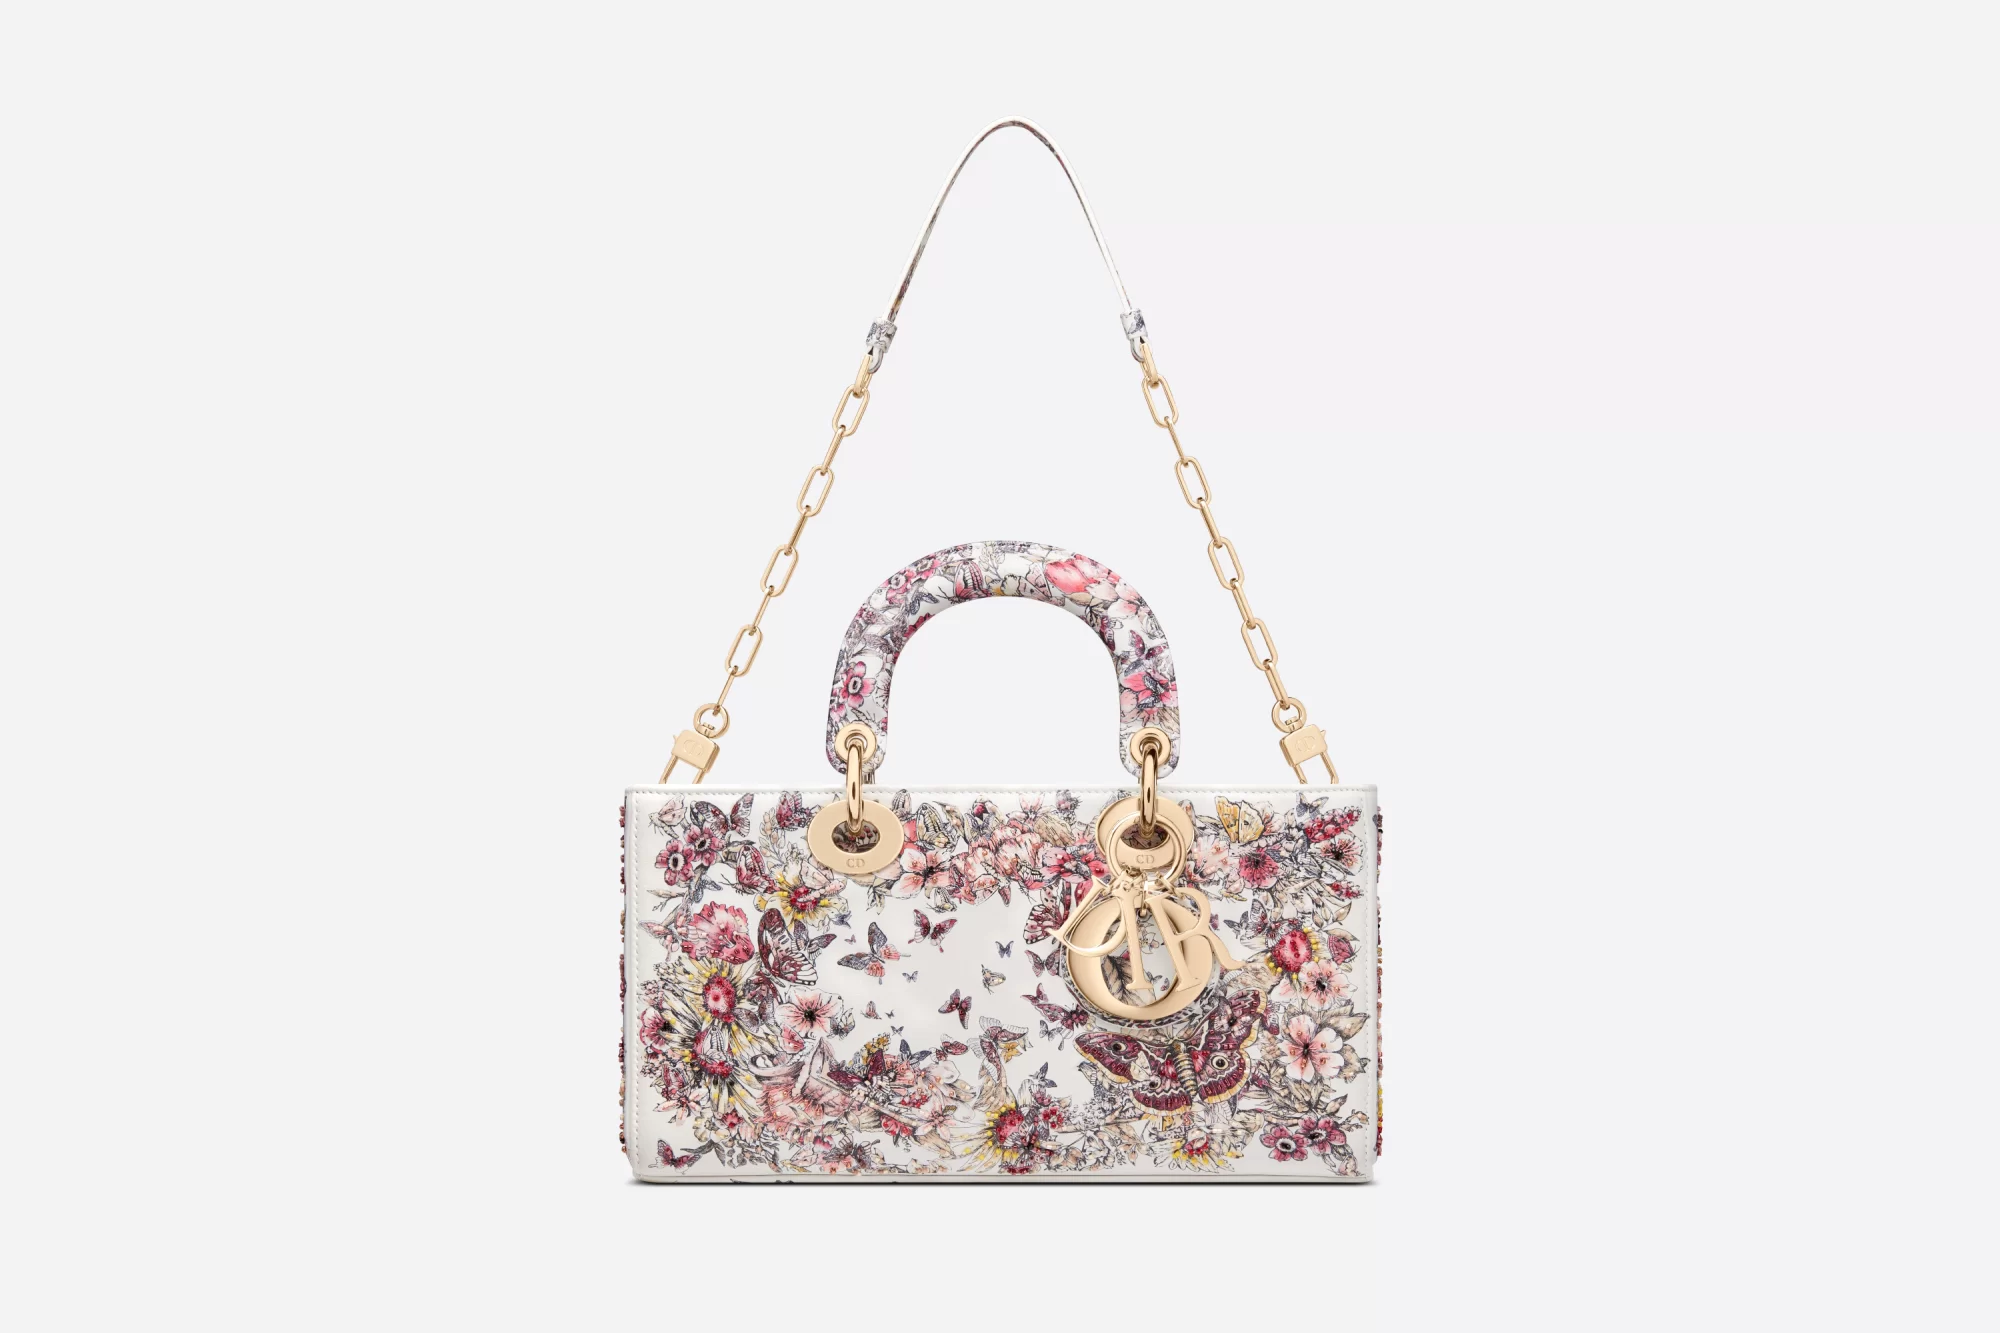 Dior's Lunar New Year capsule collection is an ode to flowers